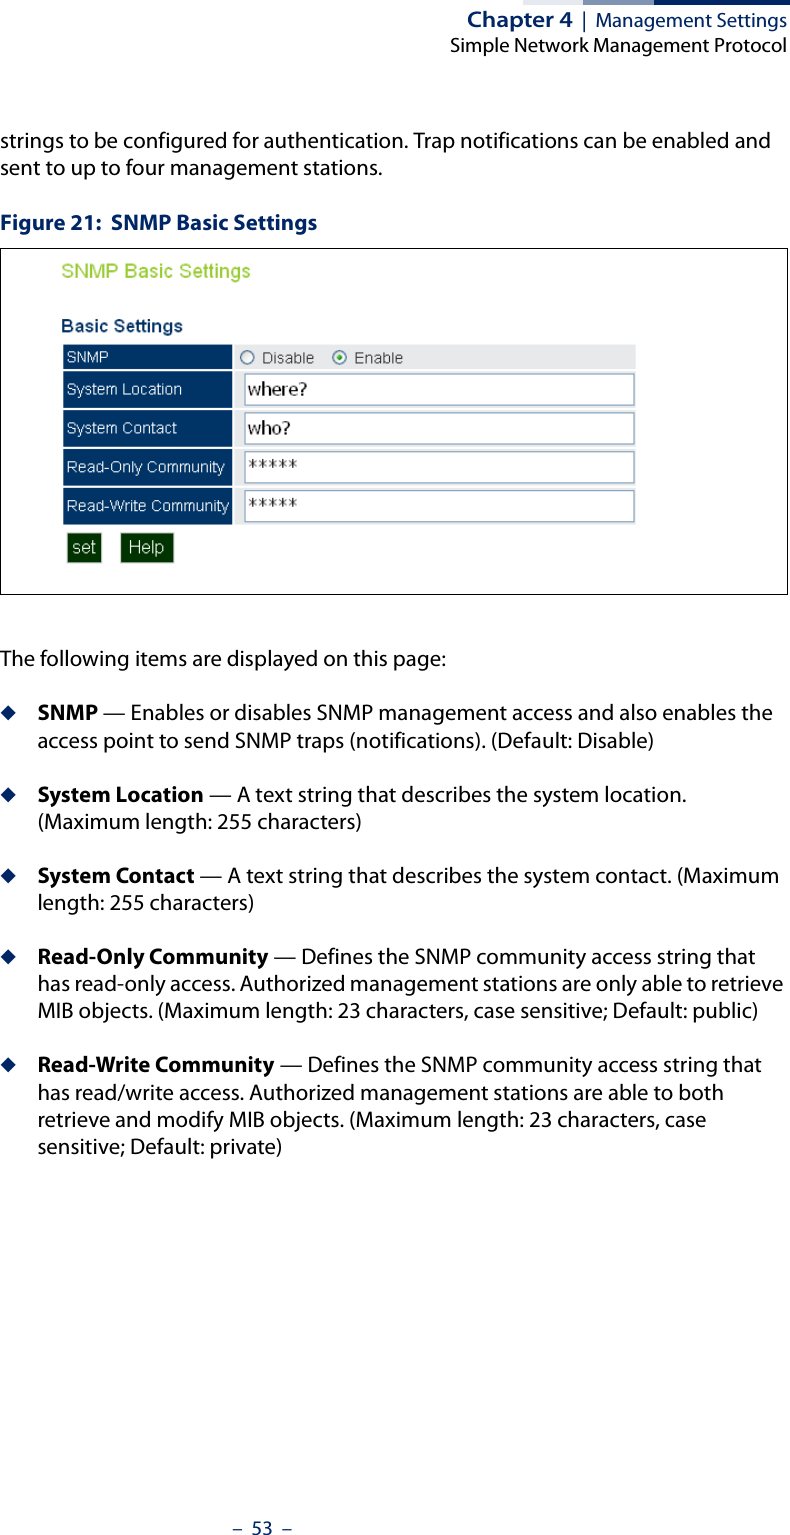 Chapter 4  |  Management SettingsSimple Network Management Protocol–  53  –strings to be configured for authentication. Trap notifications can be enabled and sent to up to four management stations.Figure 21:  SNMP Basic SettingsThe following items are displayed on this page:◆SNMP — Enables or disables SNMP management access and also enables the access point to send SNMP traps (notifications). (Default: Disable)◆System Location — A text string that describes the system location. (Maximum length: 255 characters)◆System Contact — A text string that describes the system contact. (Maximum length: 255 characters)◆Read-Only Community — Defines the SNMP community access string that has read-only access. Authorized management stations are only able to retrieve MIB objects. (Maximum length: 23 characters, case sensitive; Default: public)◆Read-Write Community — Defines the SNMP community access string that has read/write access. Authorized management stations are able to both retrieve and modify MIB objects. (Maximum length: 23 characters, case sensitive; Default: private)